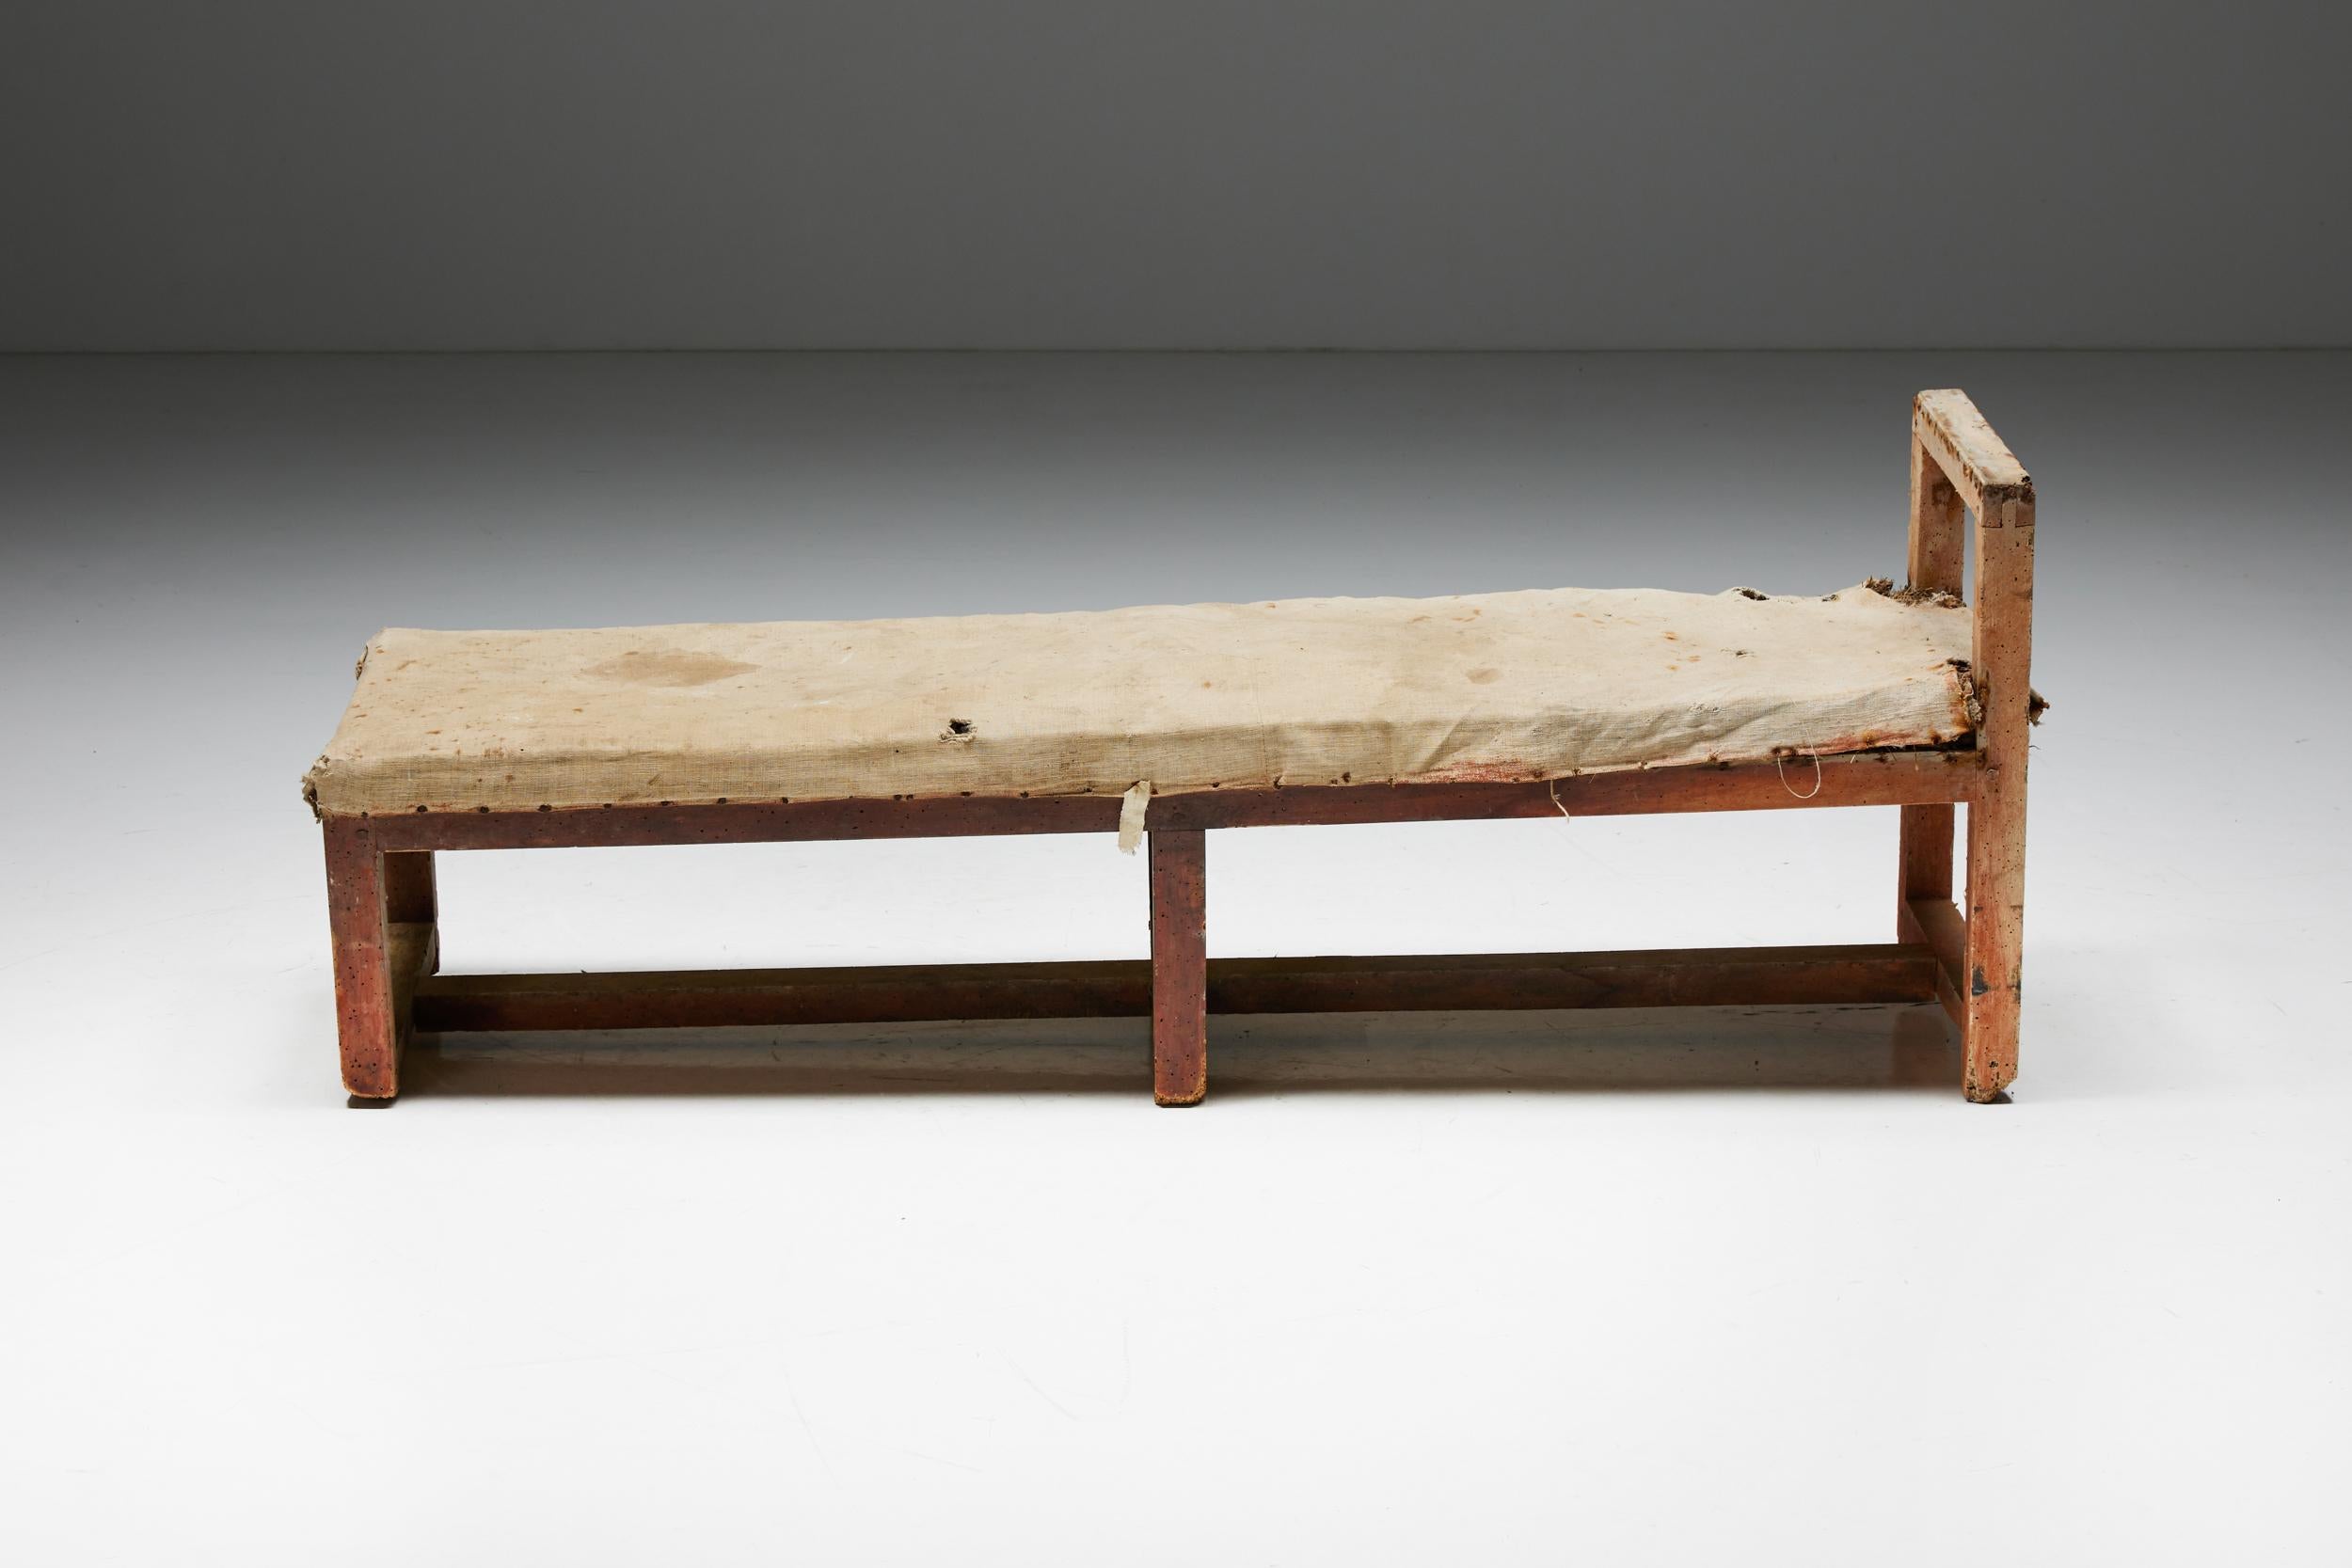 Pair of Rustic Travail Populaire Benches, France, 19th Century For Sale 1